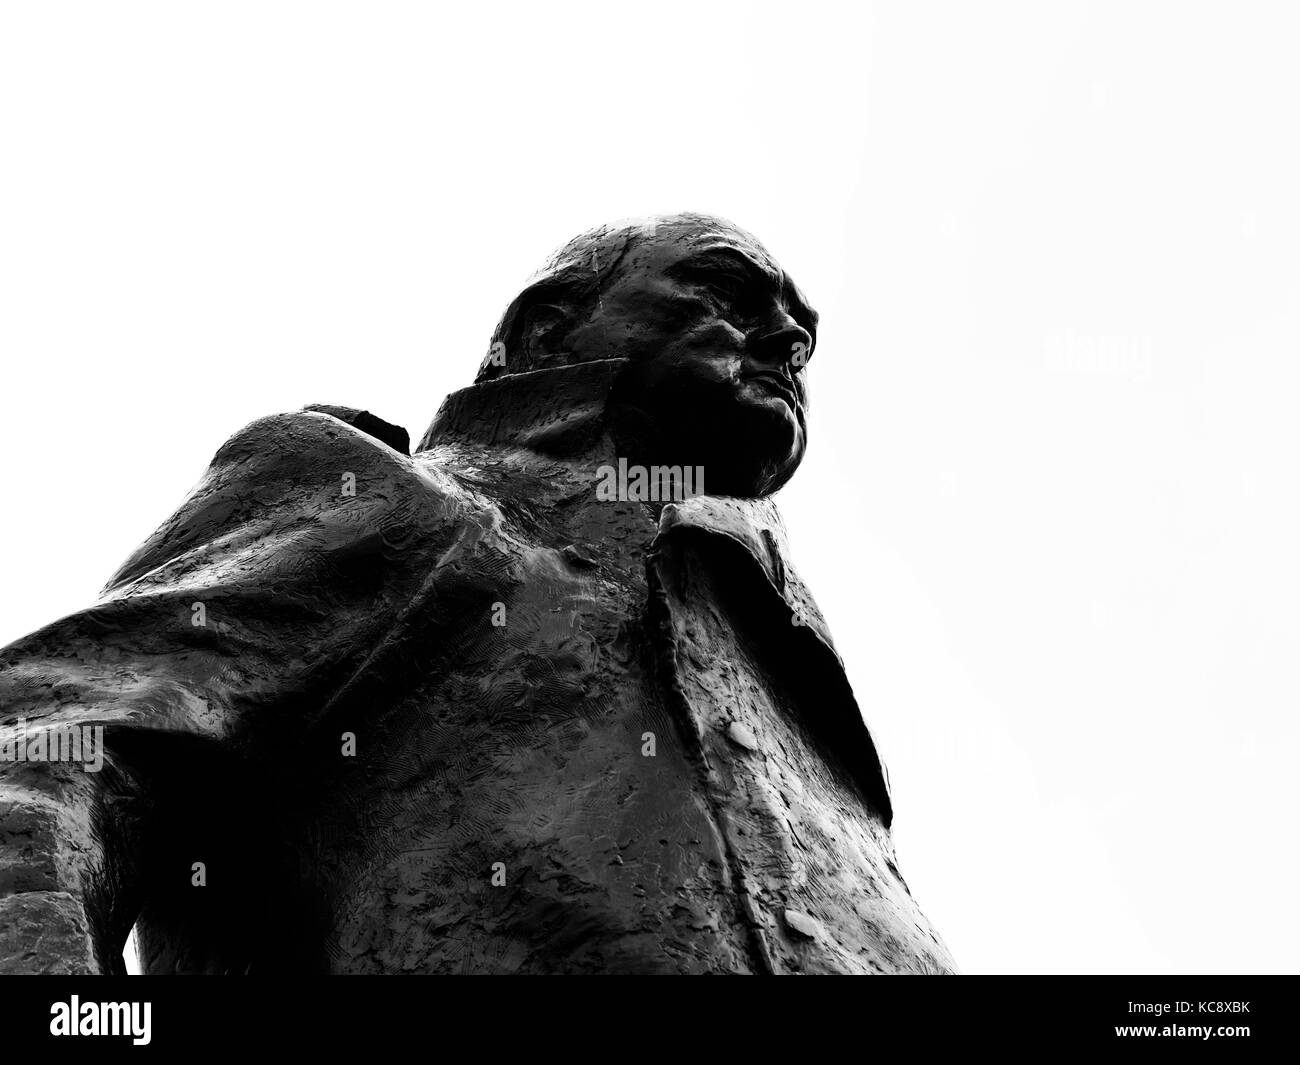 Winston churchill statue Black and White Stock Photos & Images - Alamy